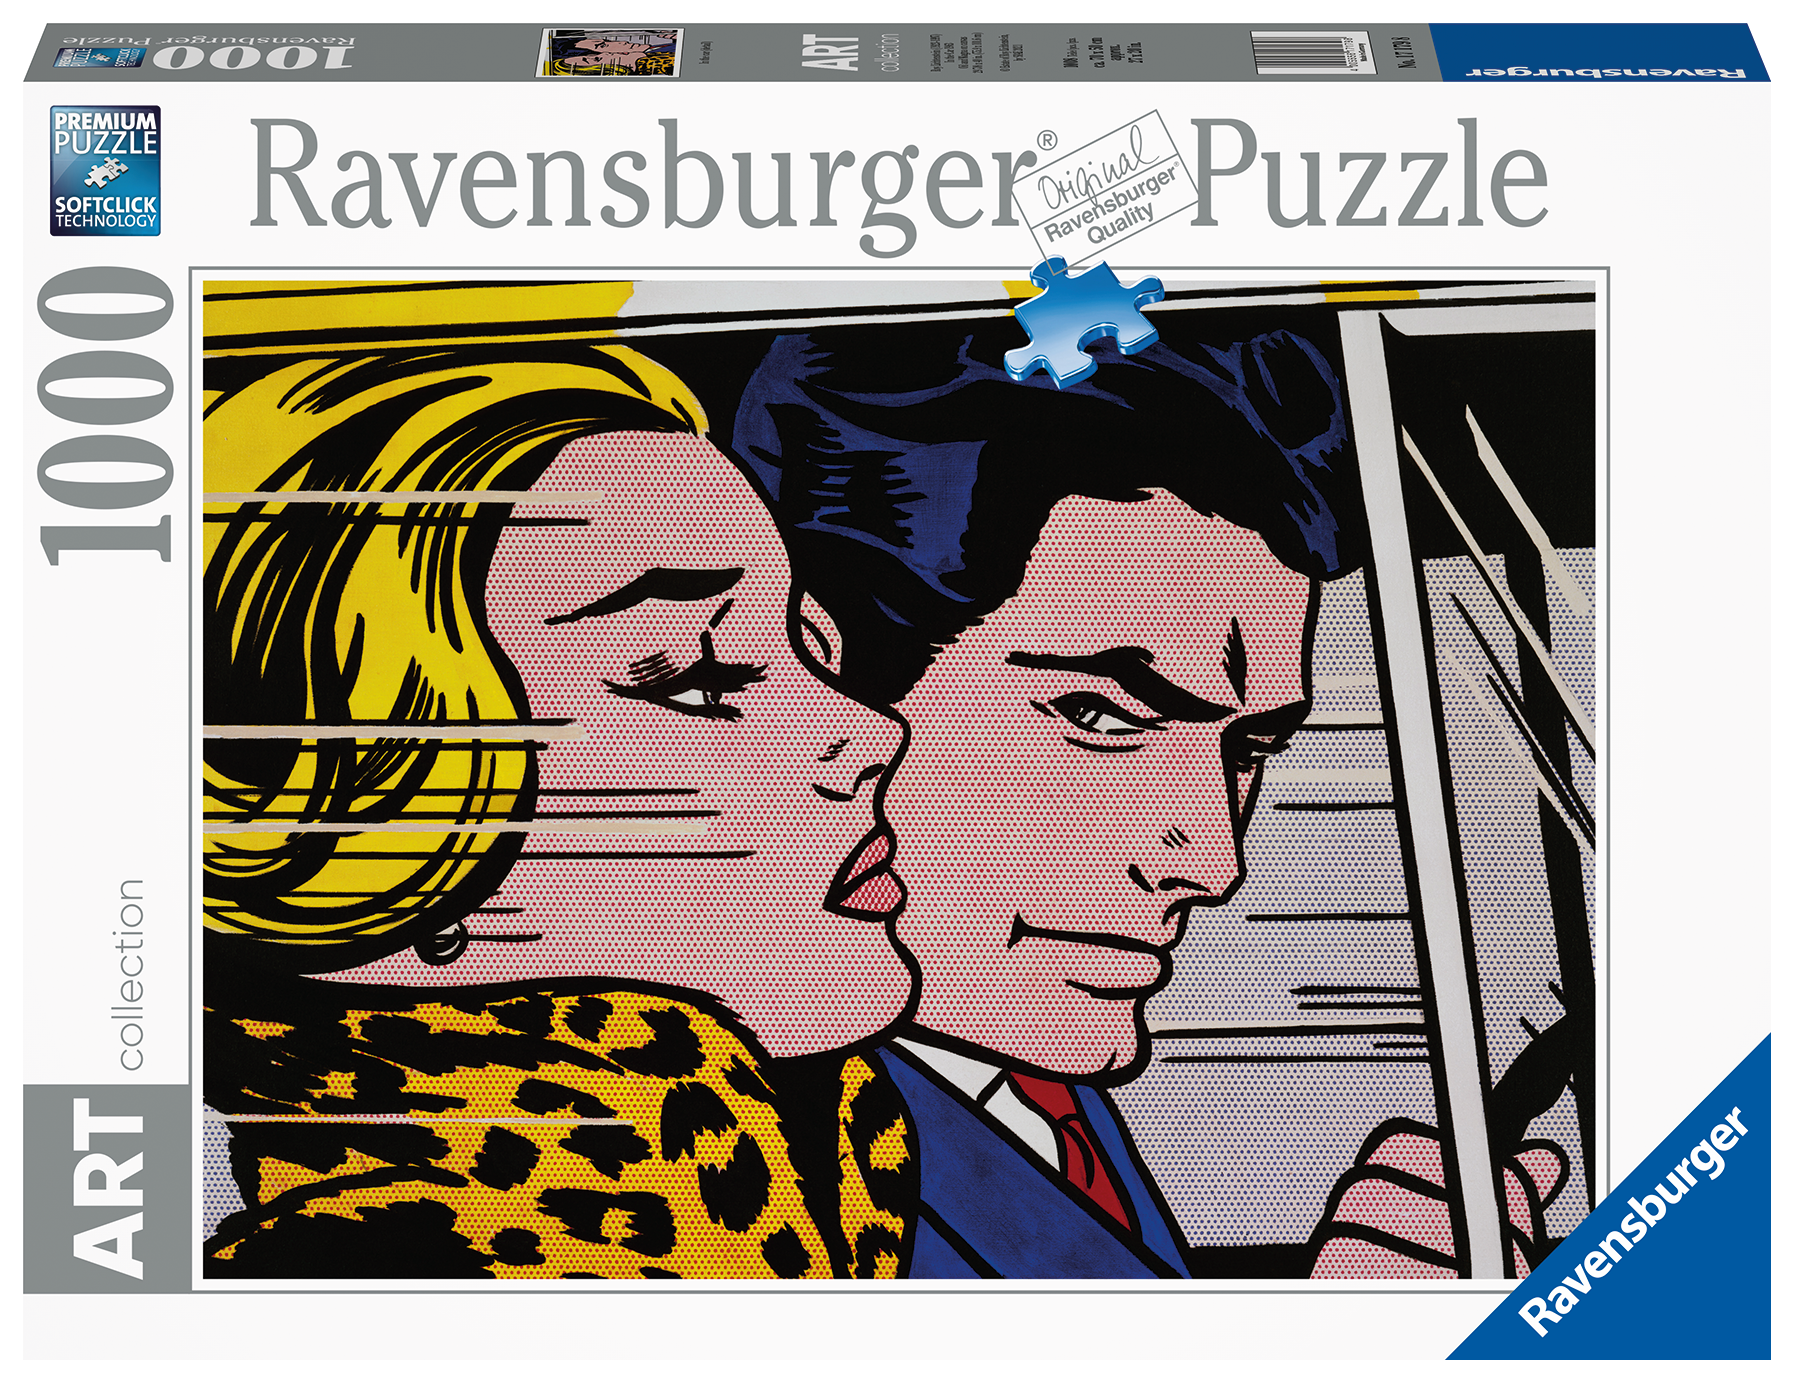 Ravensburger - puzzle lichtenstein: in the car, art collection, 1000 pezzi, puzzle adulti - RAVENSBURGER